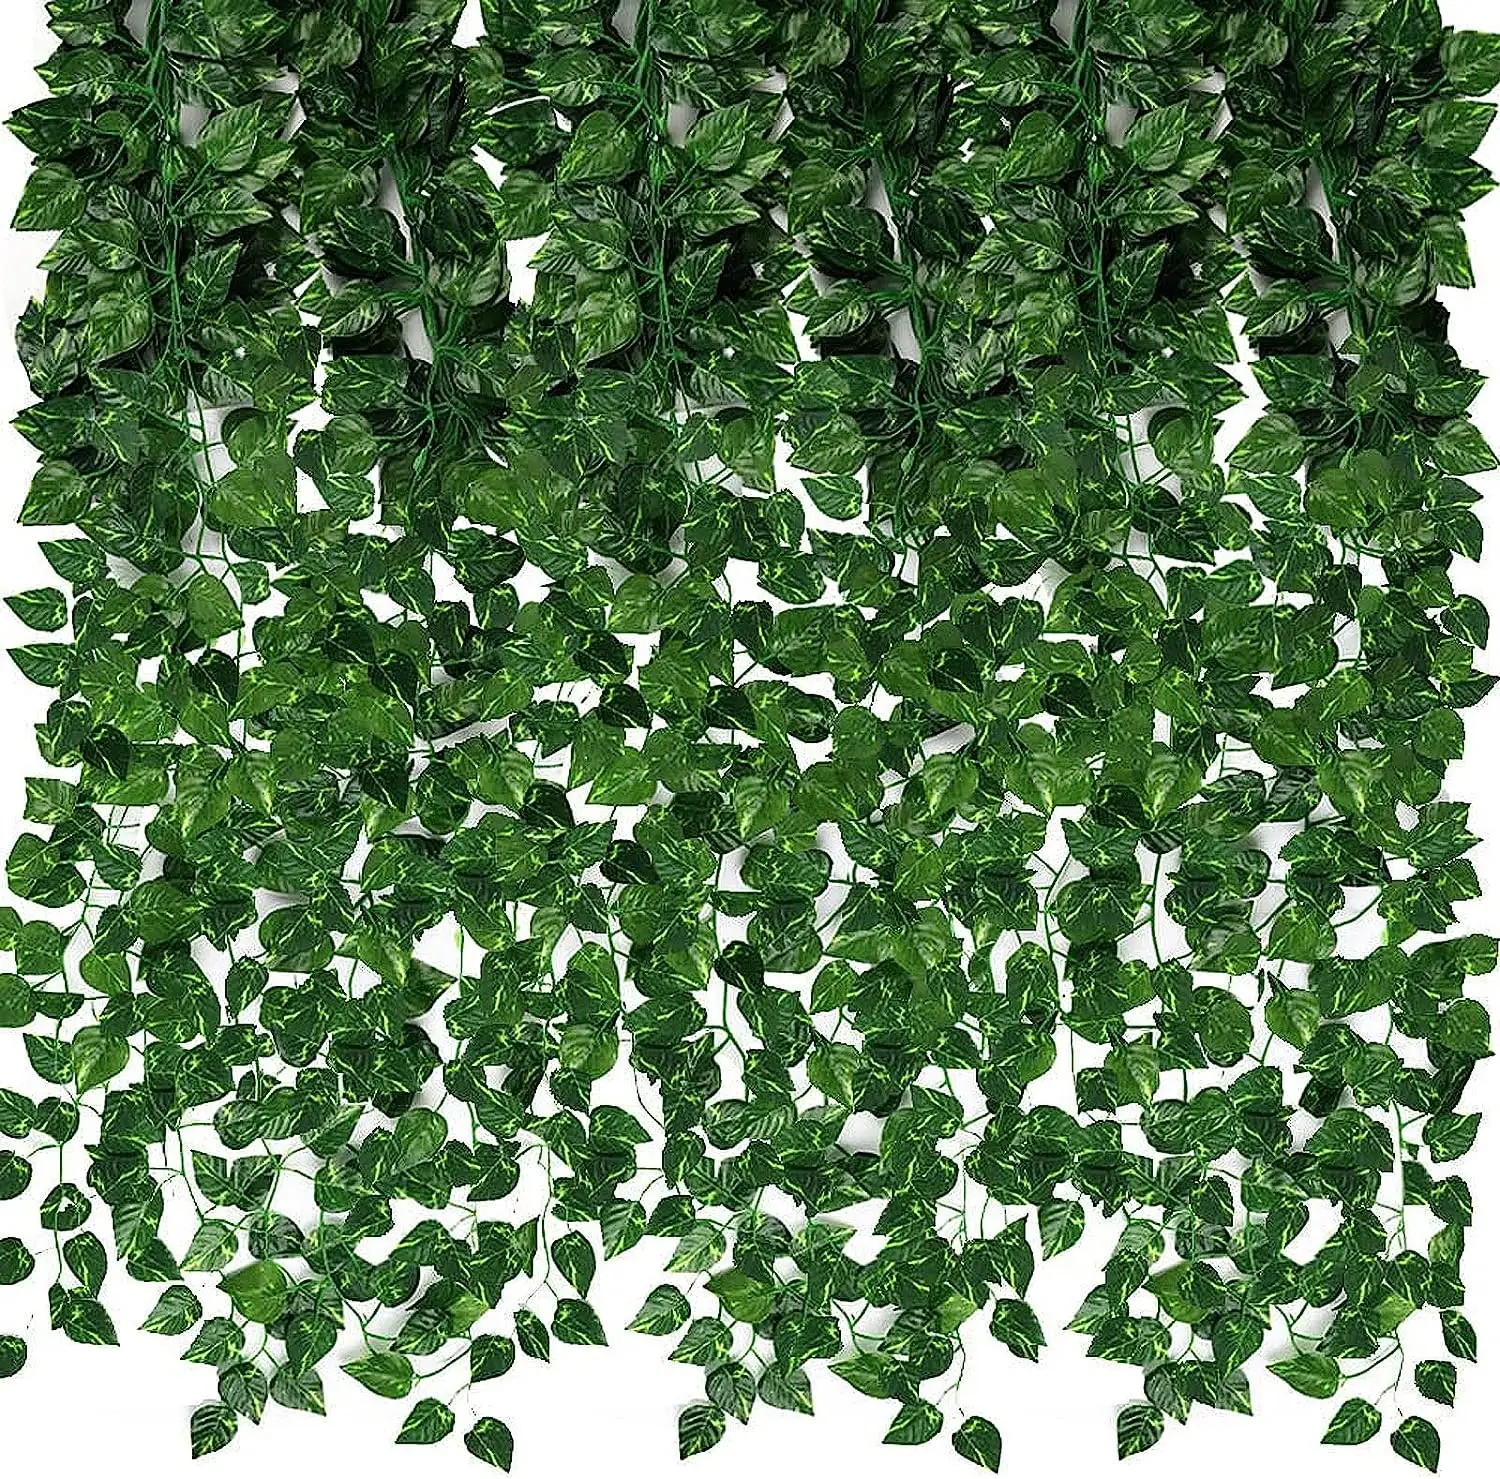 Artificial Ivy Greenery Garland Fake Vines Hanging Plants Backdrop Bedroom Wall Decor Jungle Theme Party Wedding Green Leaves